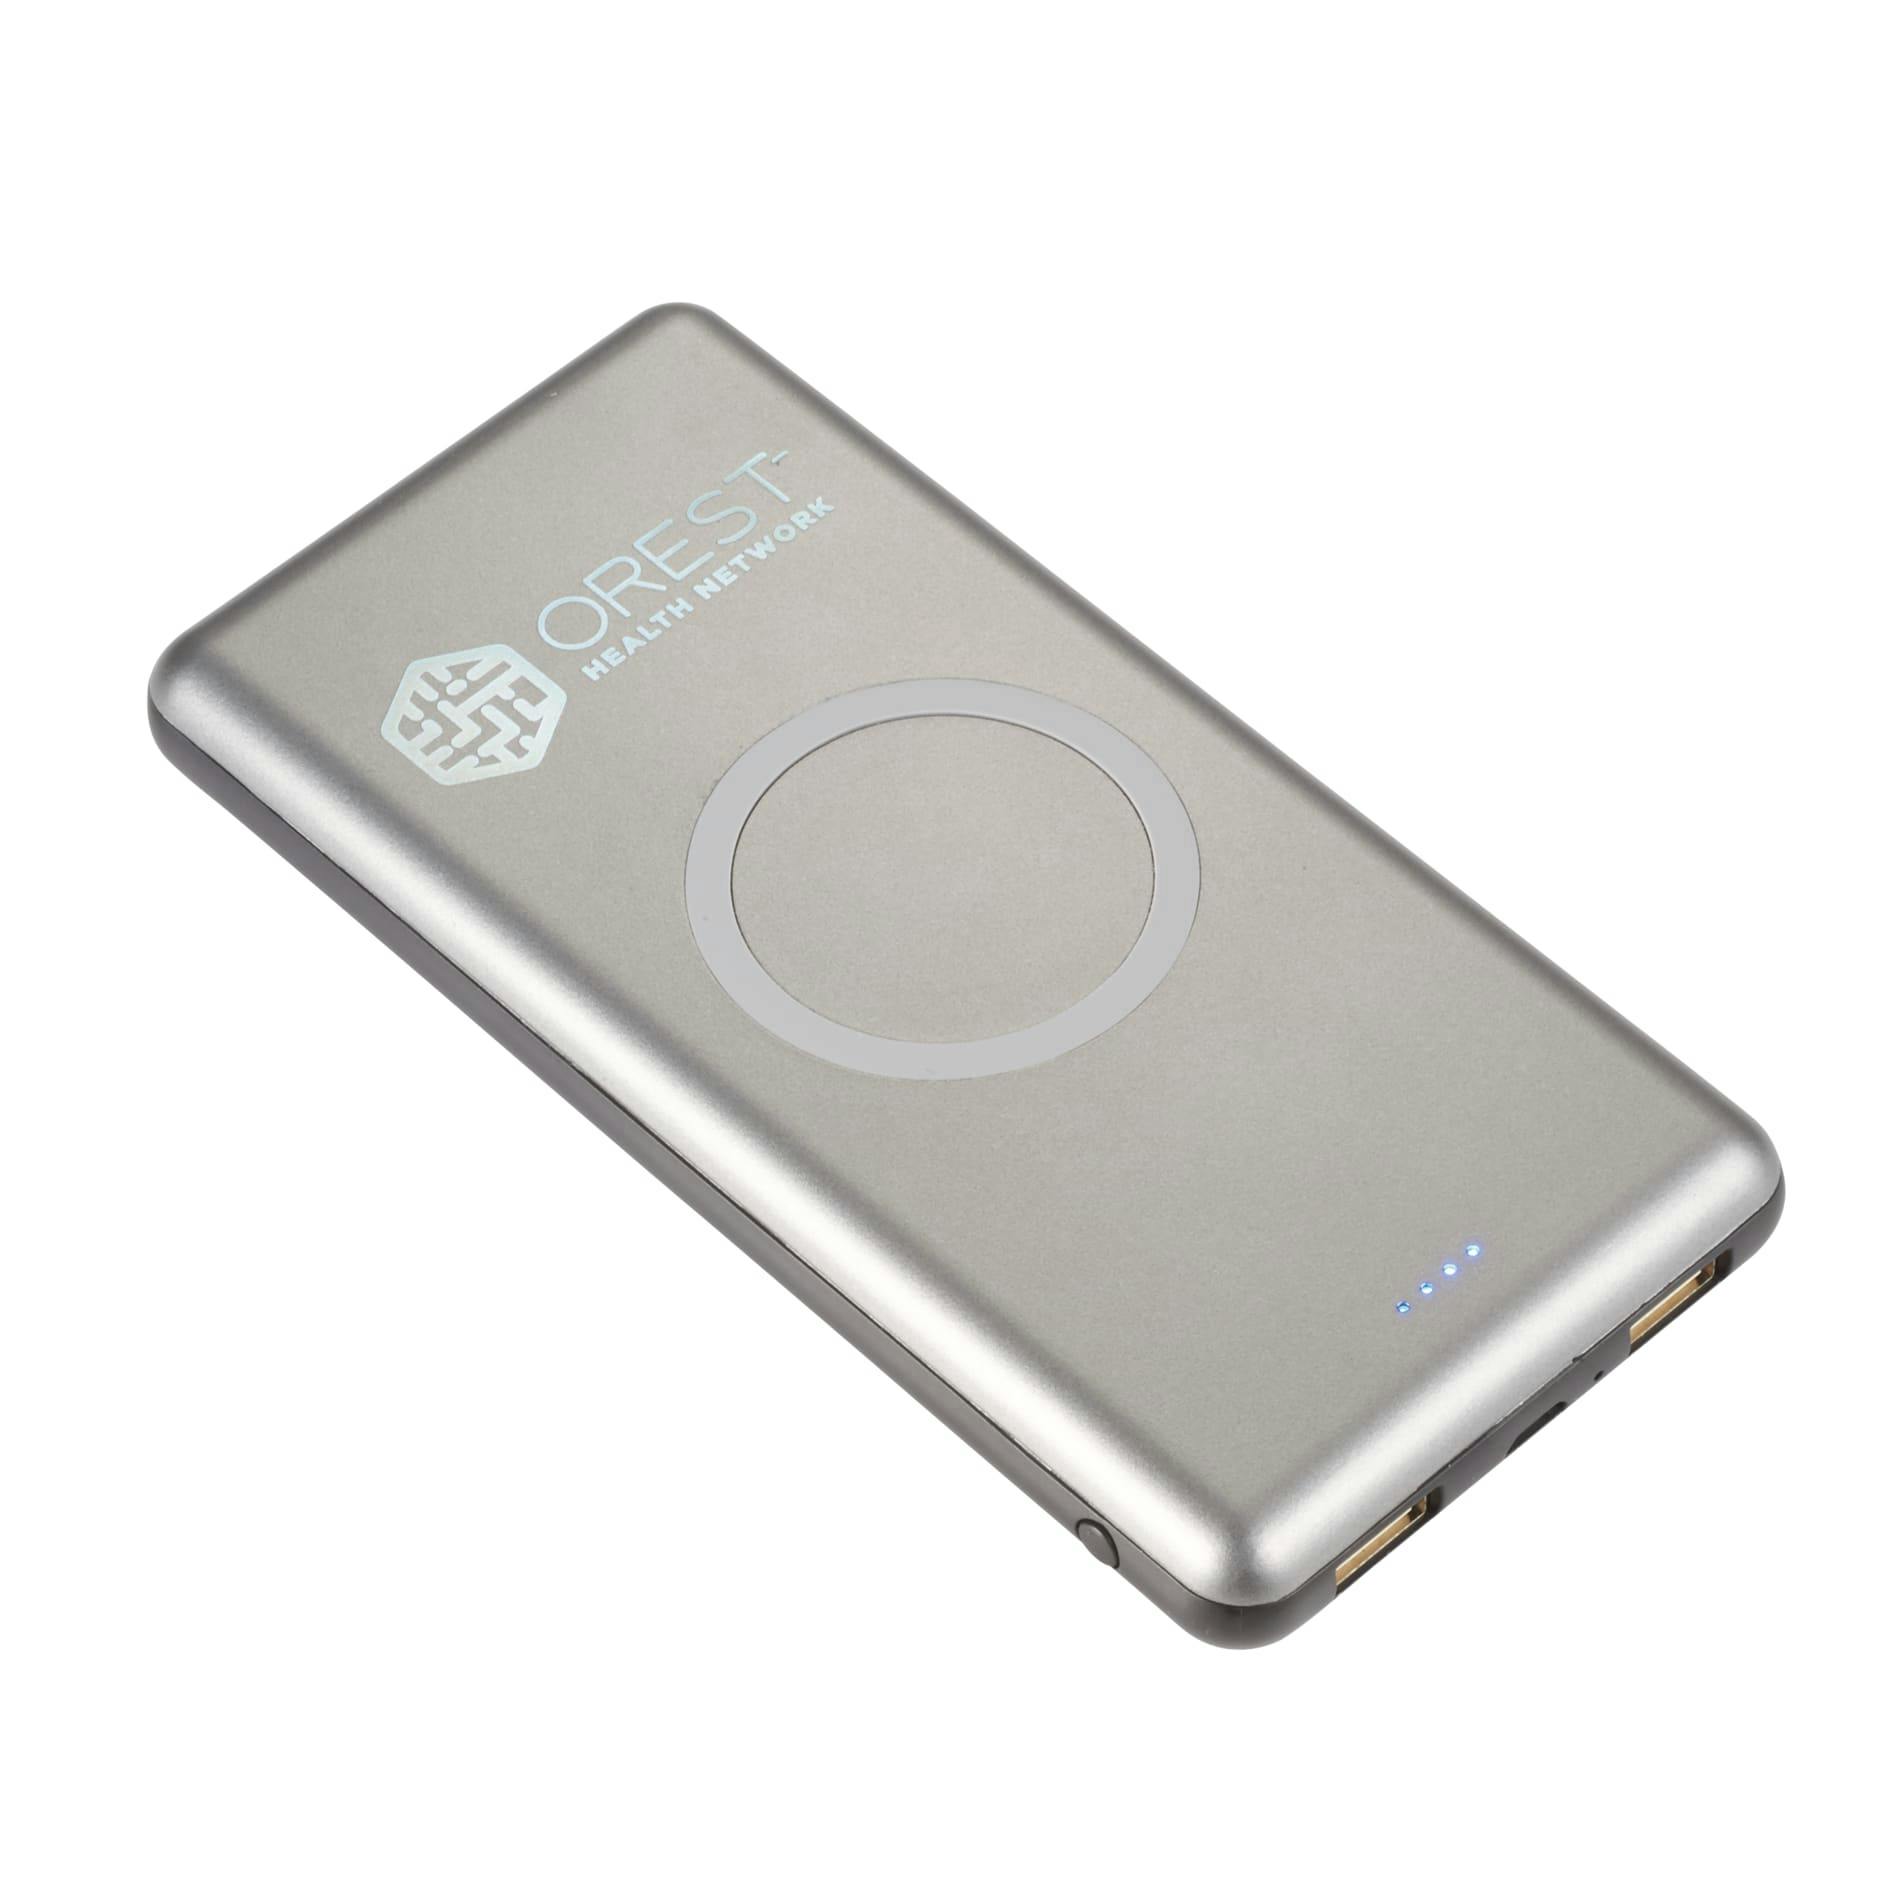 UL Listed Light Up Qi 10000 Wireless Power Bank - additional Image 4